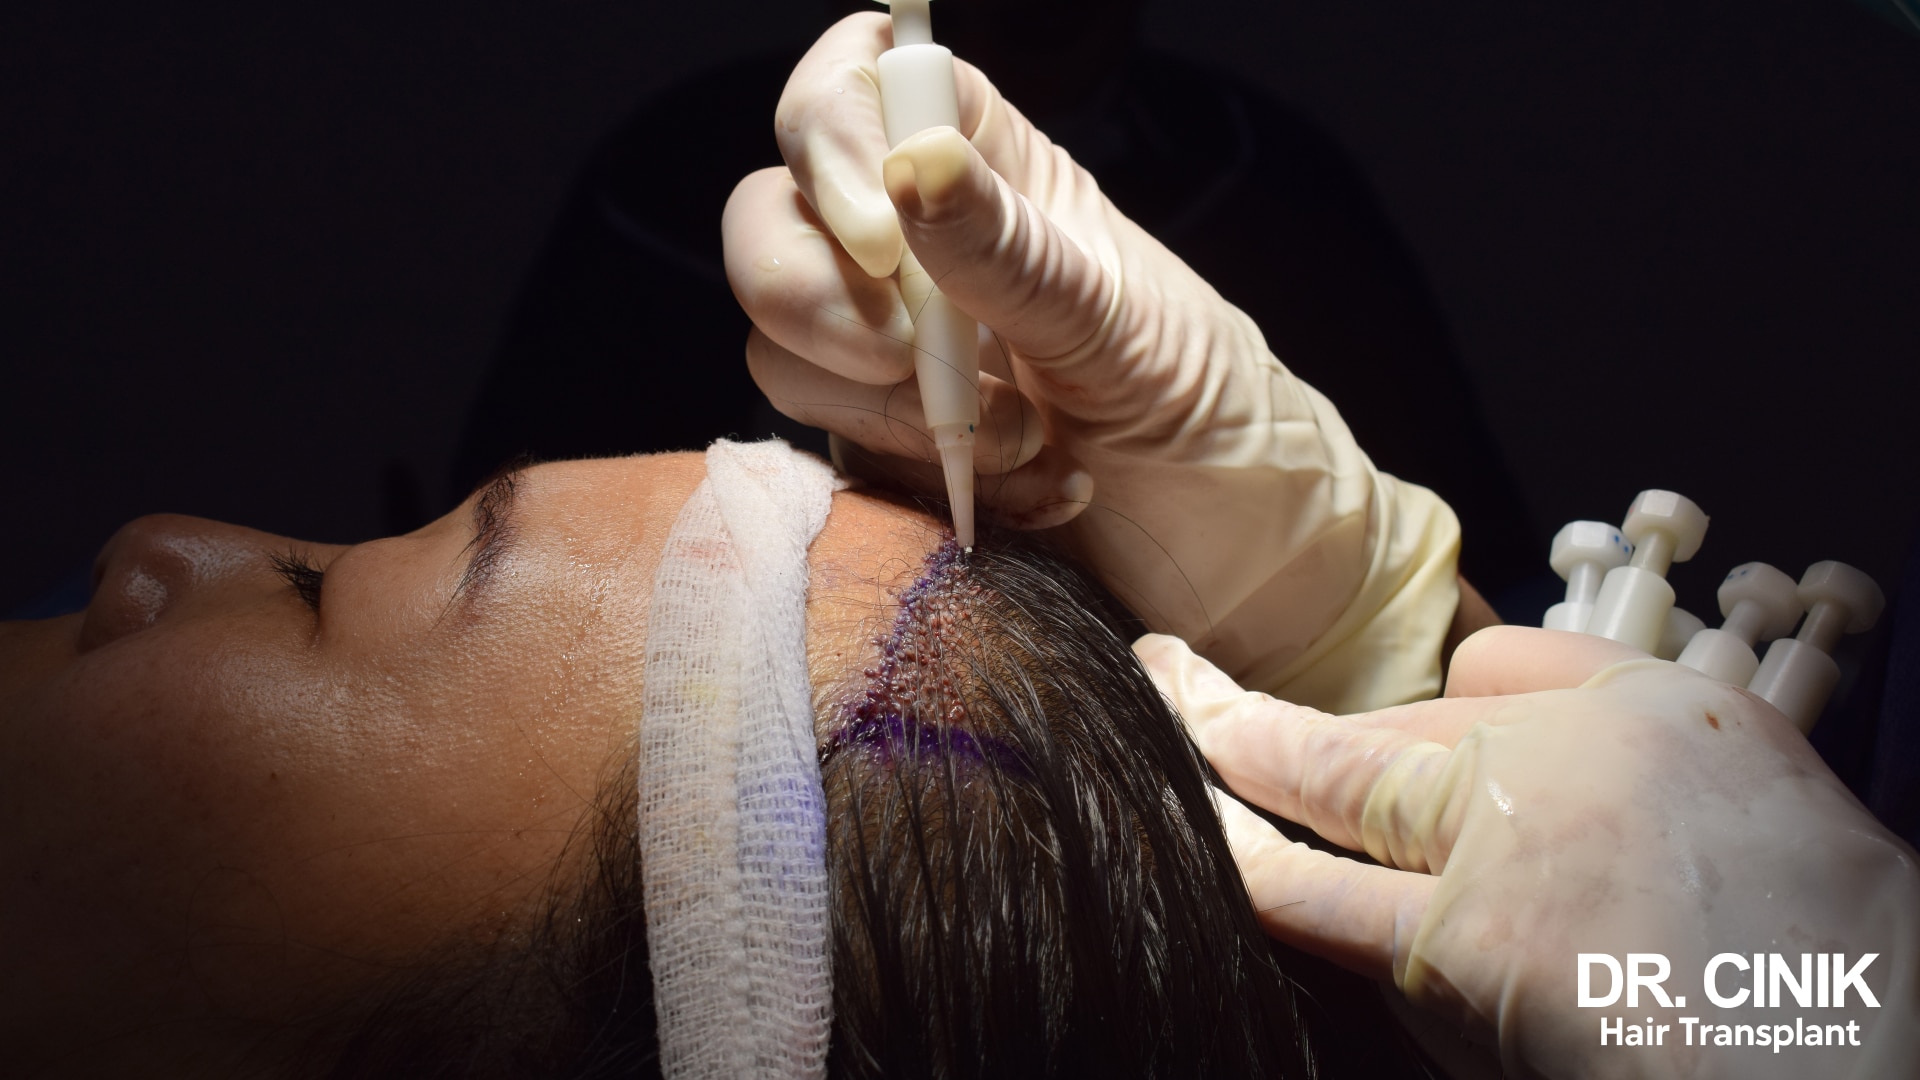 A woman is in the process of receiving a Direct Hair Implantation (DHI) transplant, which involves partial shaving, currently at the stage of hair follicle implantation